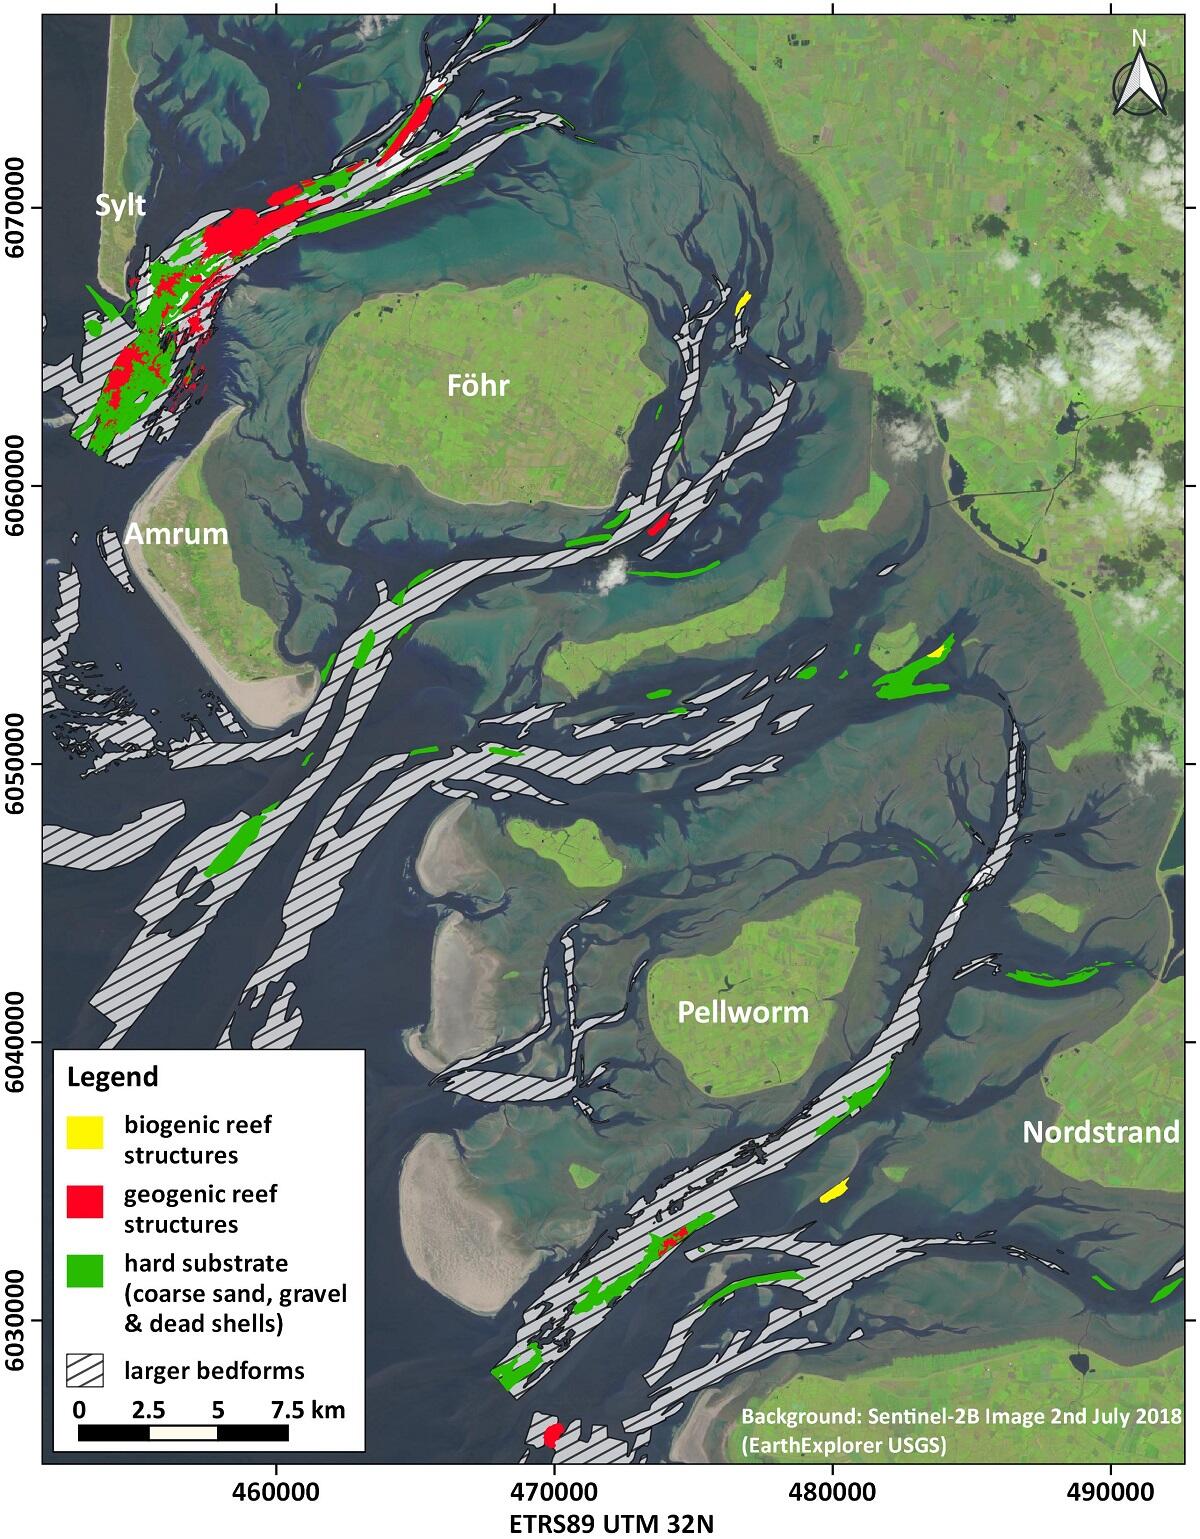 Figure 14: Distribution map of larger bedforms (wavelengths &gt; 5 m), geogenic and biogenic reef structures, as well as hard substrates in the North Frisian Wadden Sea. 